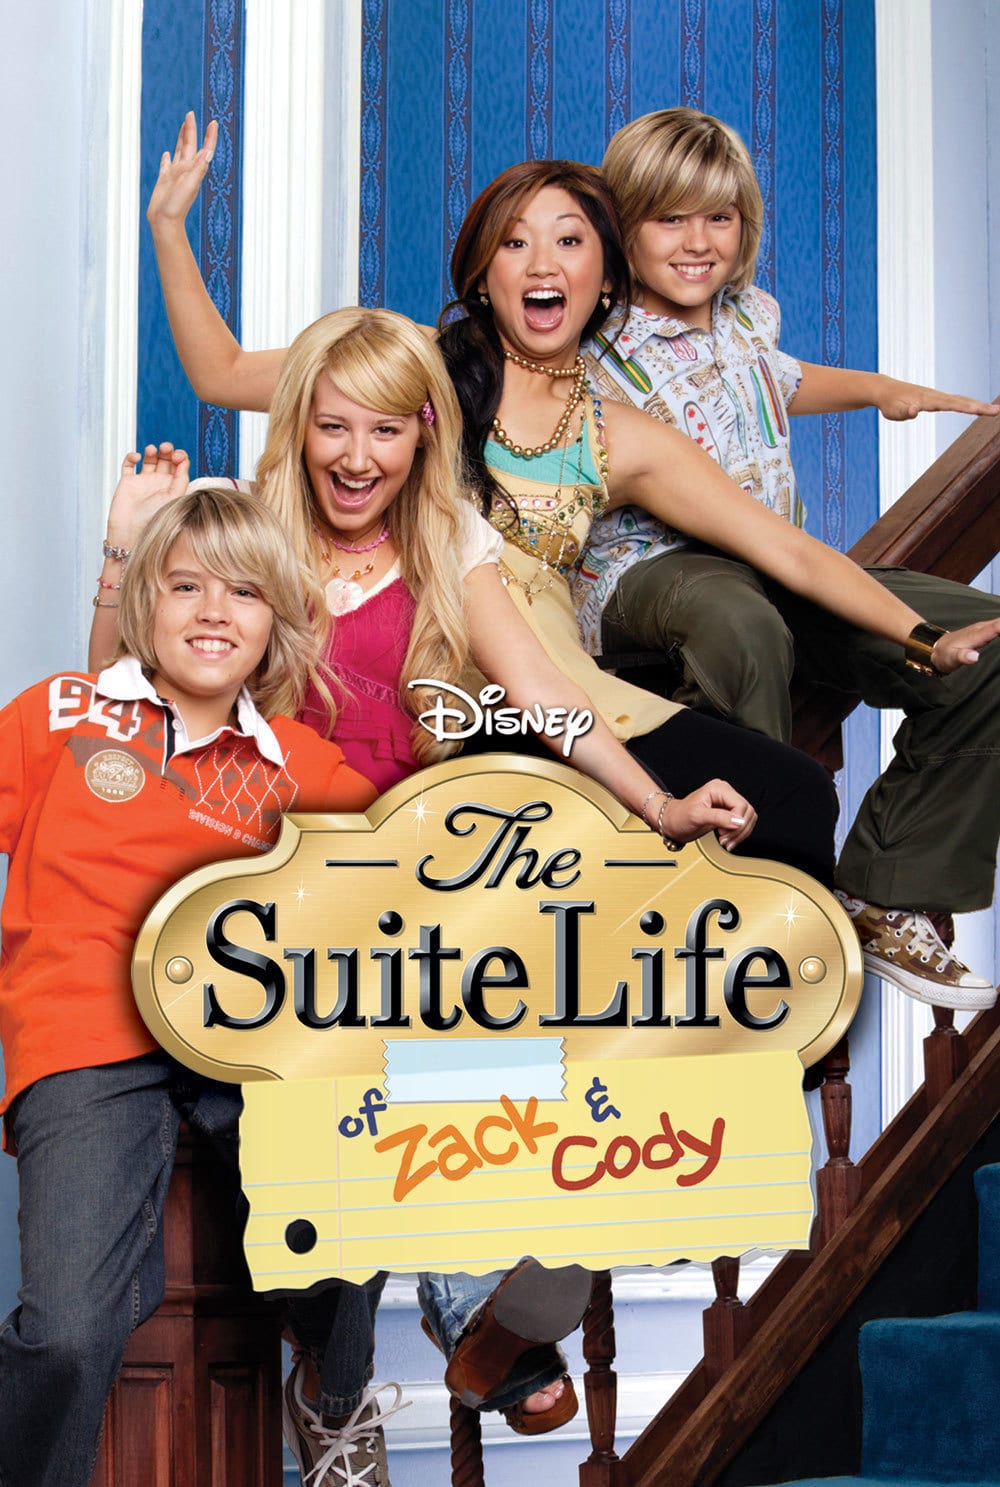 The Suite Life of Zach &amp; Cody - Disney Channel